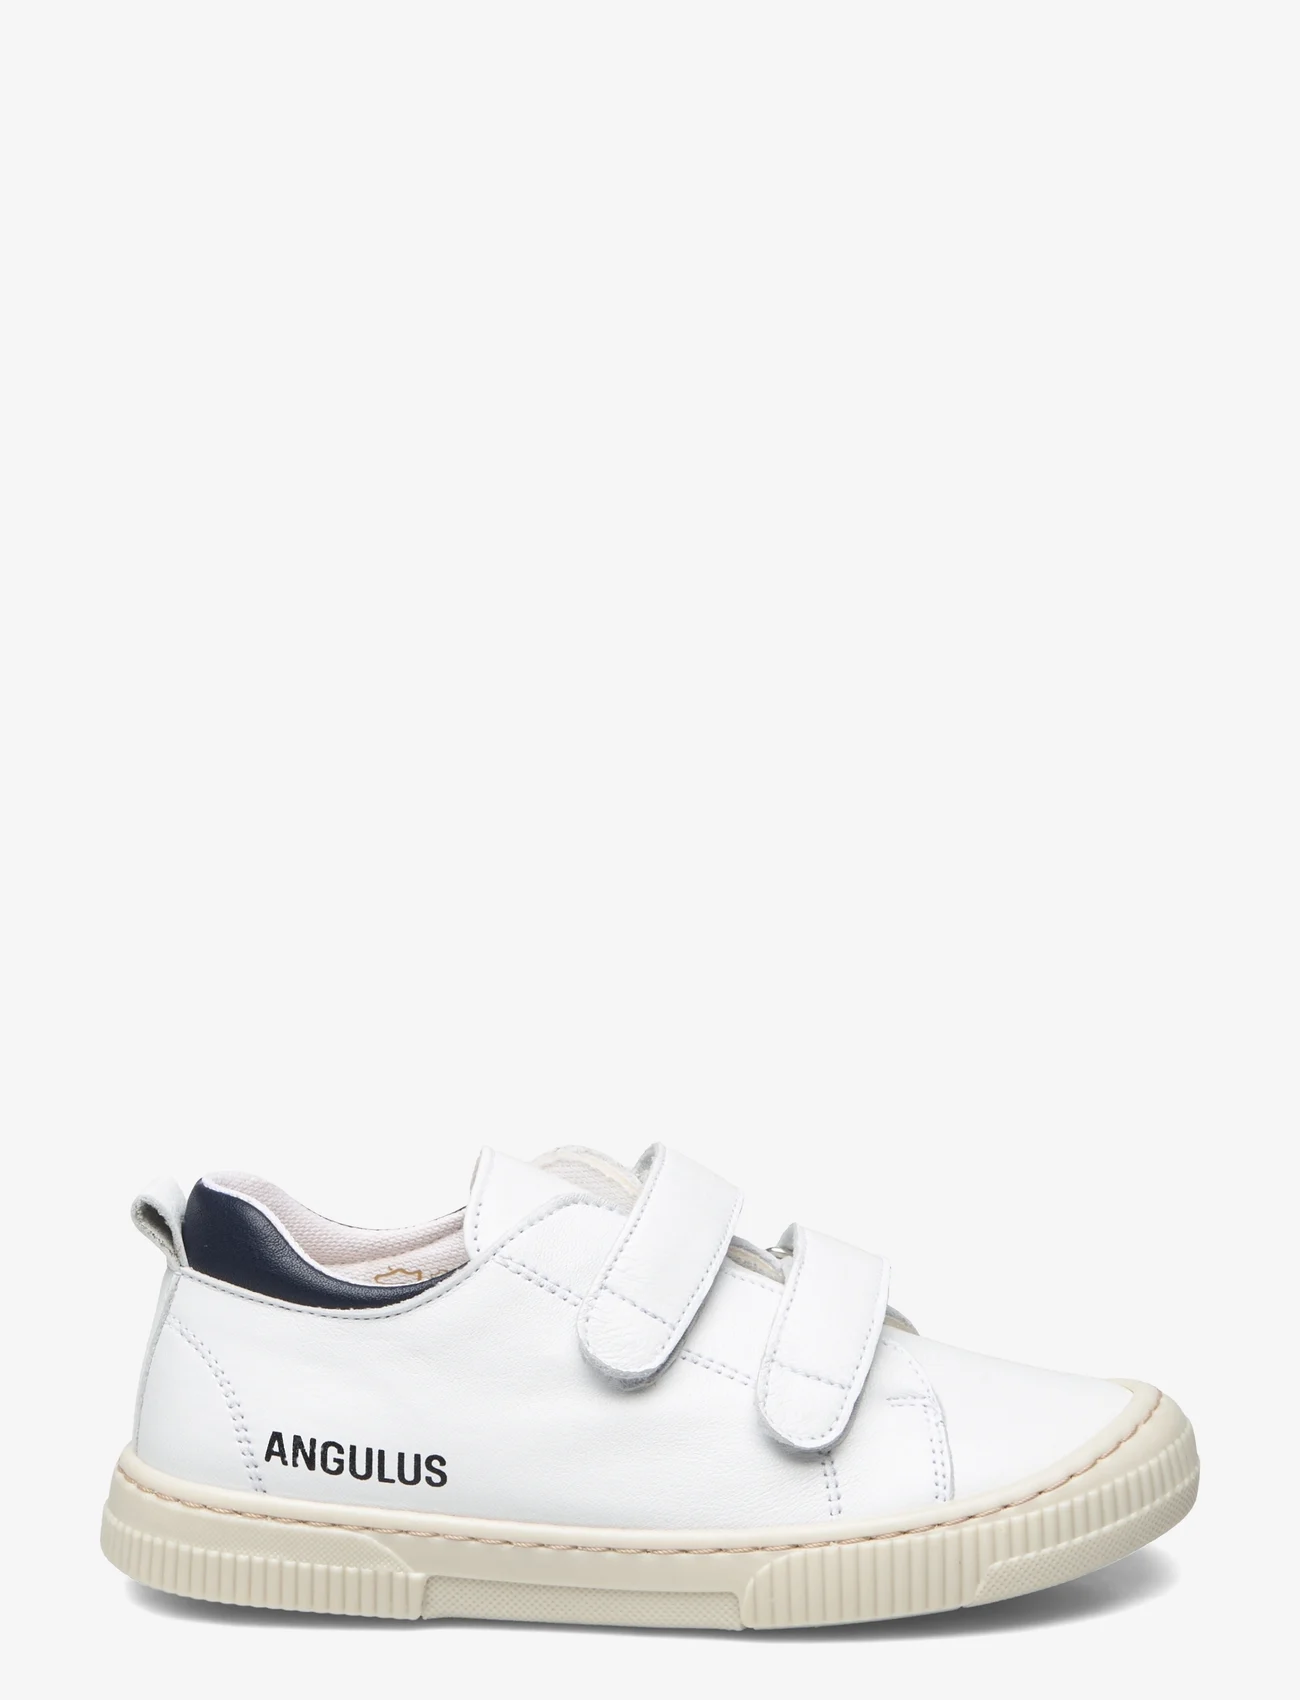 ANGULUS - Shoes - flat - with velcro - sommerschnäppchen - 1521/2585 hvid/navy - 1